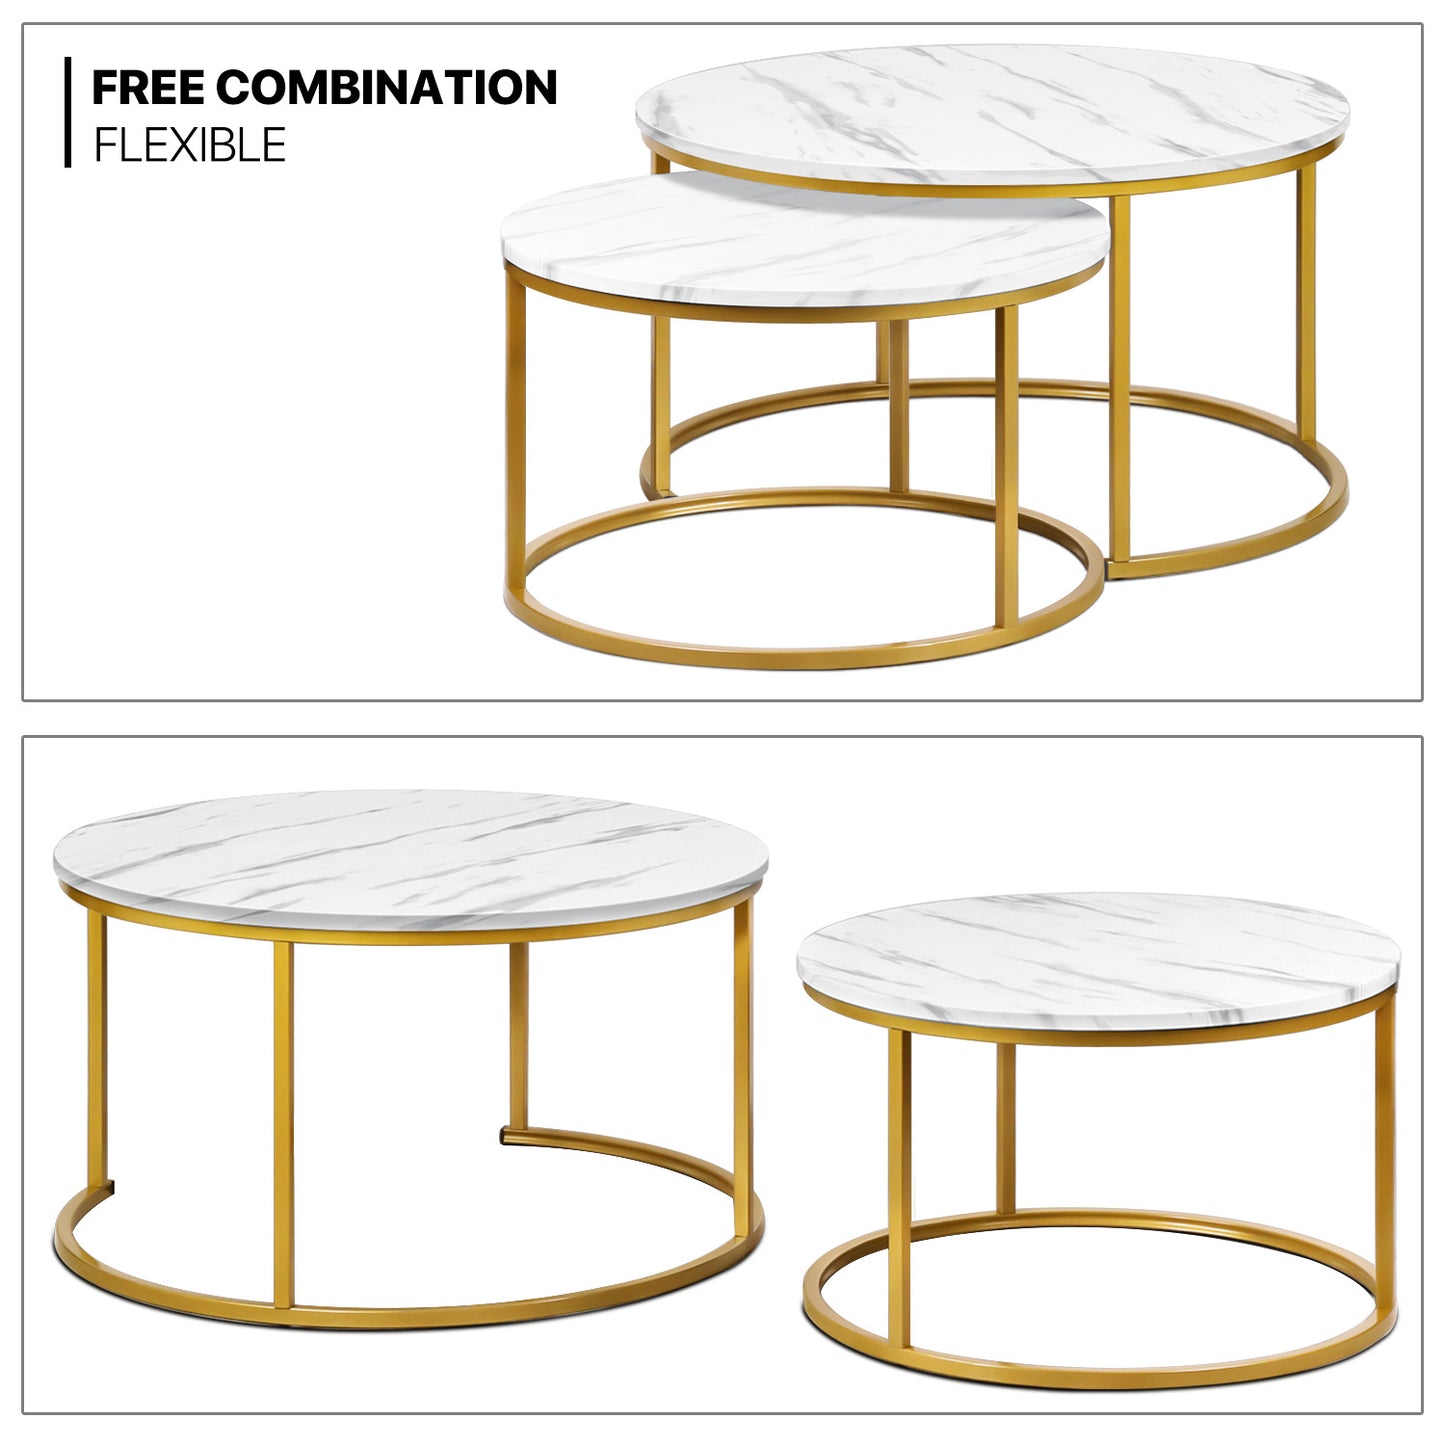 2-Piece Nesting Round Coffee Tables - Marbling Tabletop